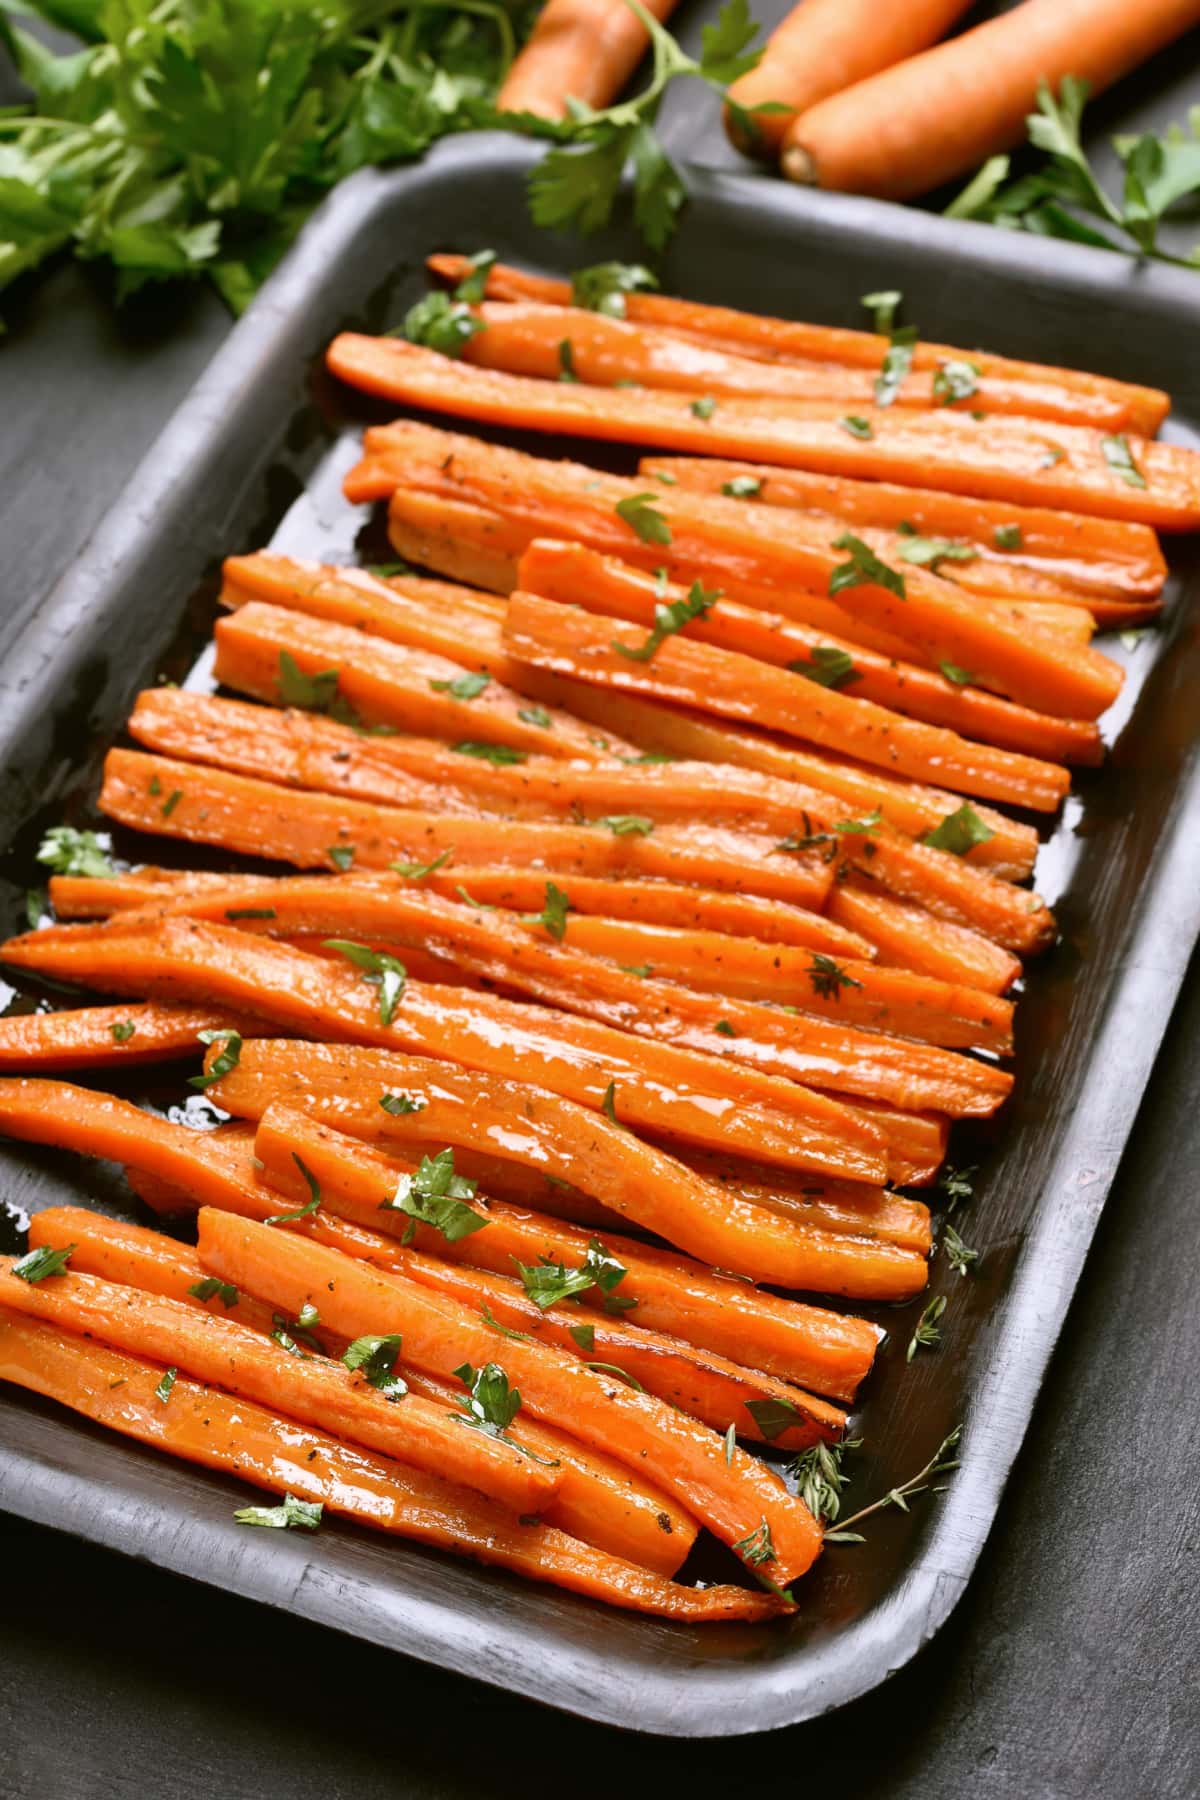 Honey roasted carrots on a baking pan garnished with chopped parsley.